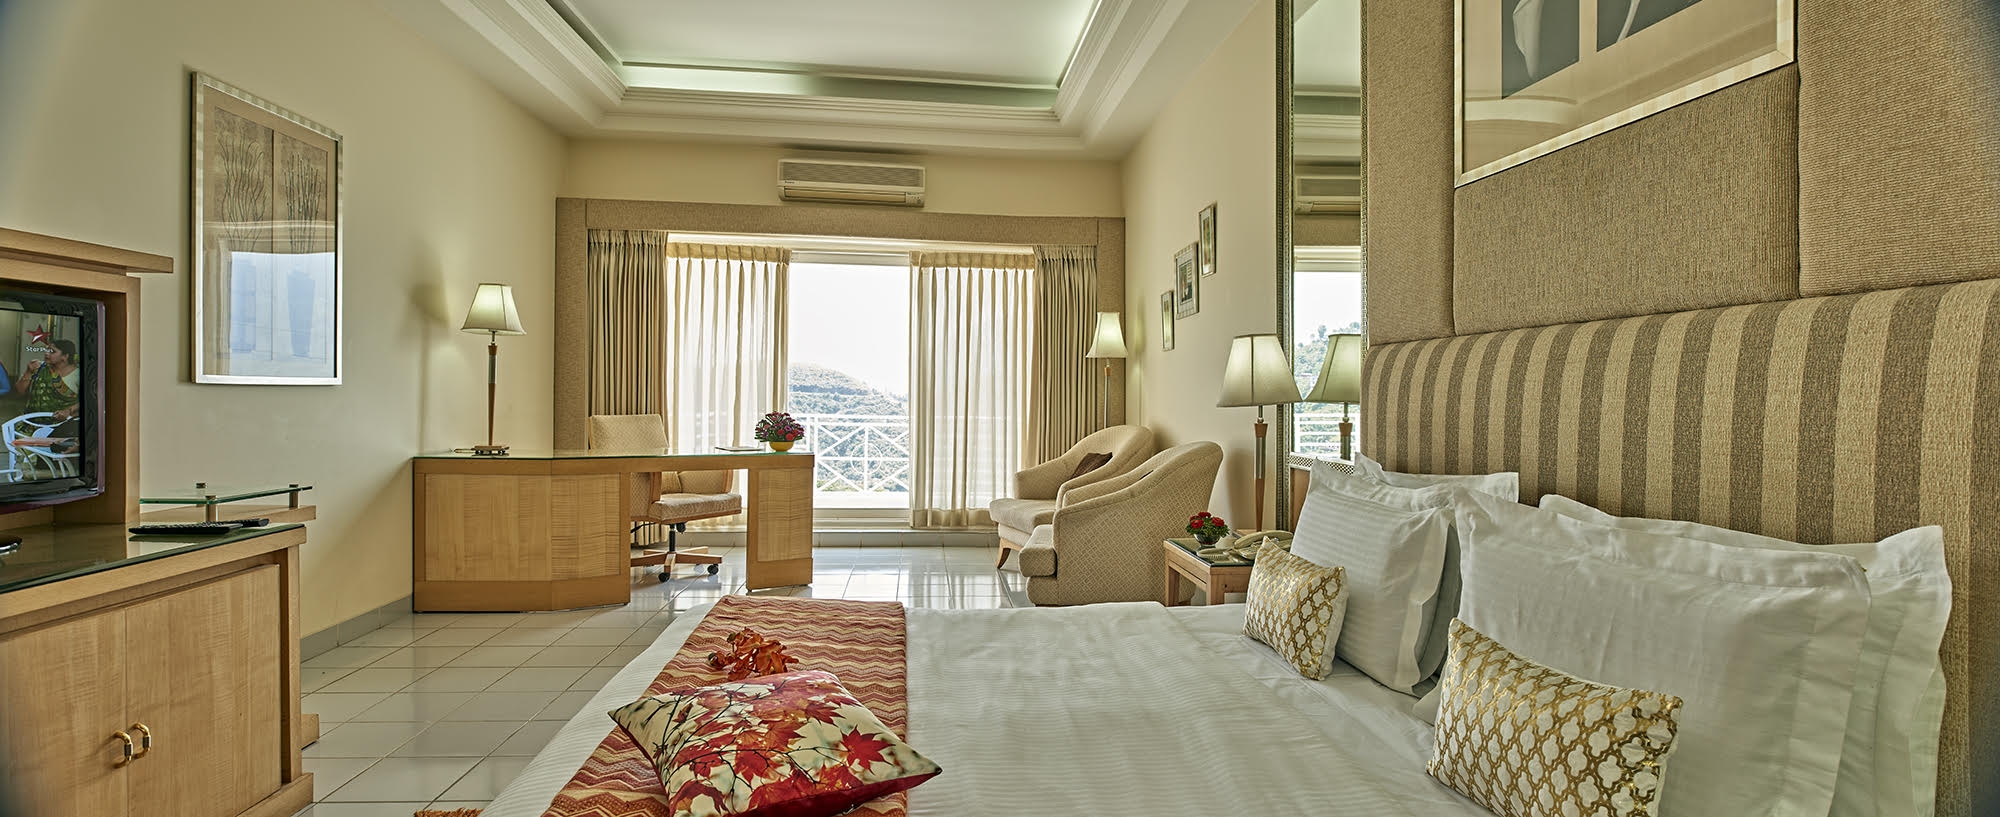 Comfortable rooms at the resort